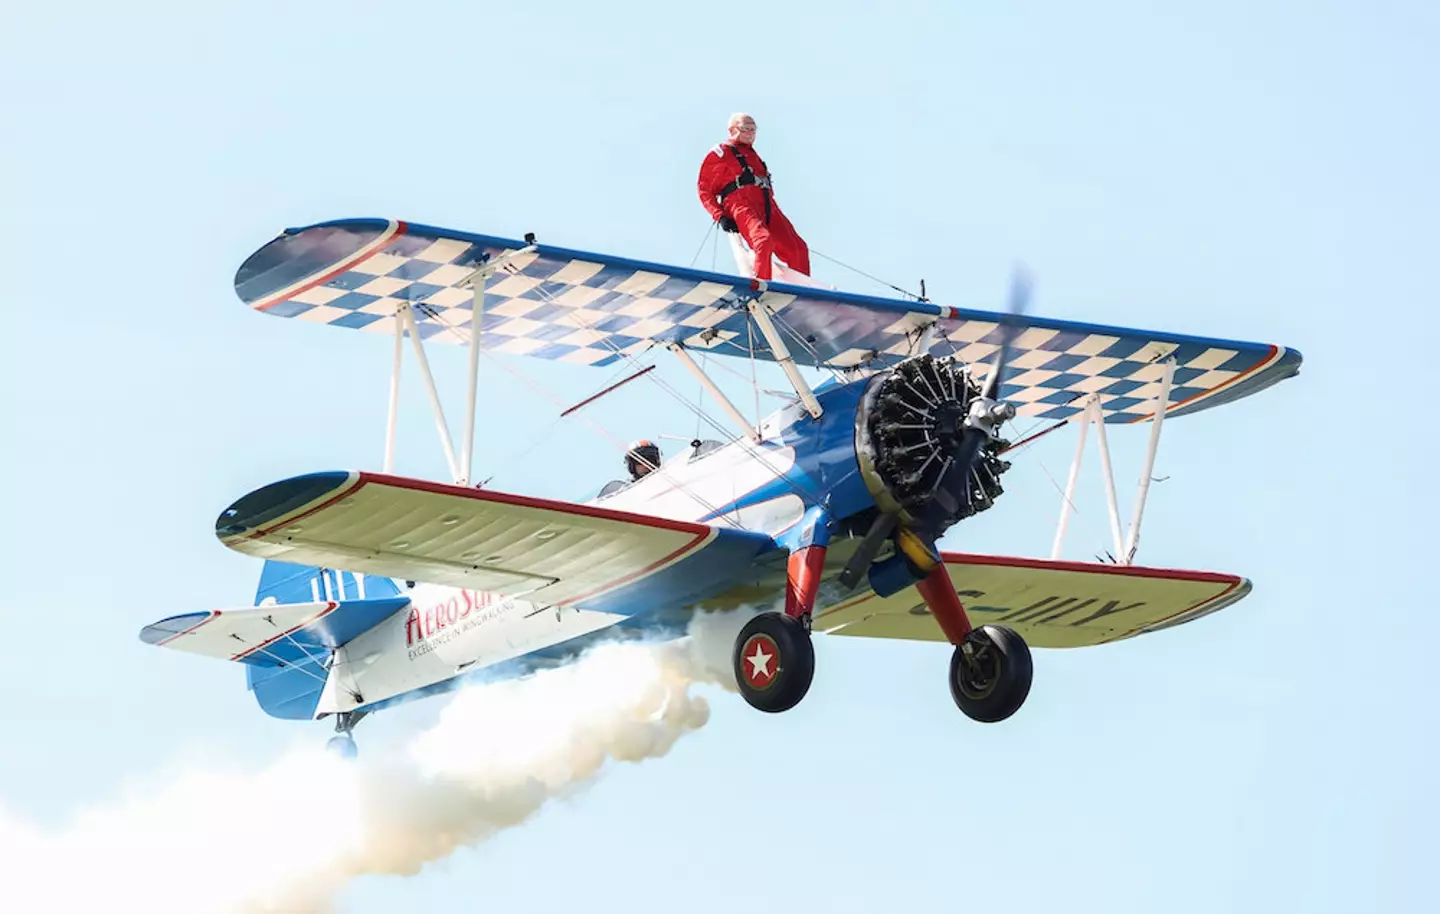 Ivor Button is the world's oldest wing walker.